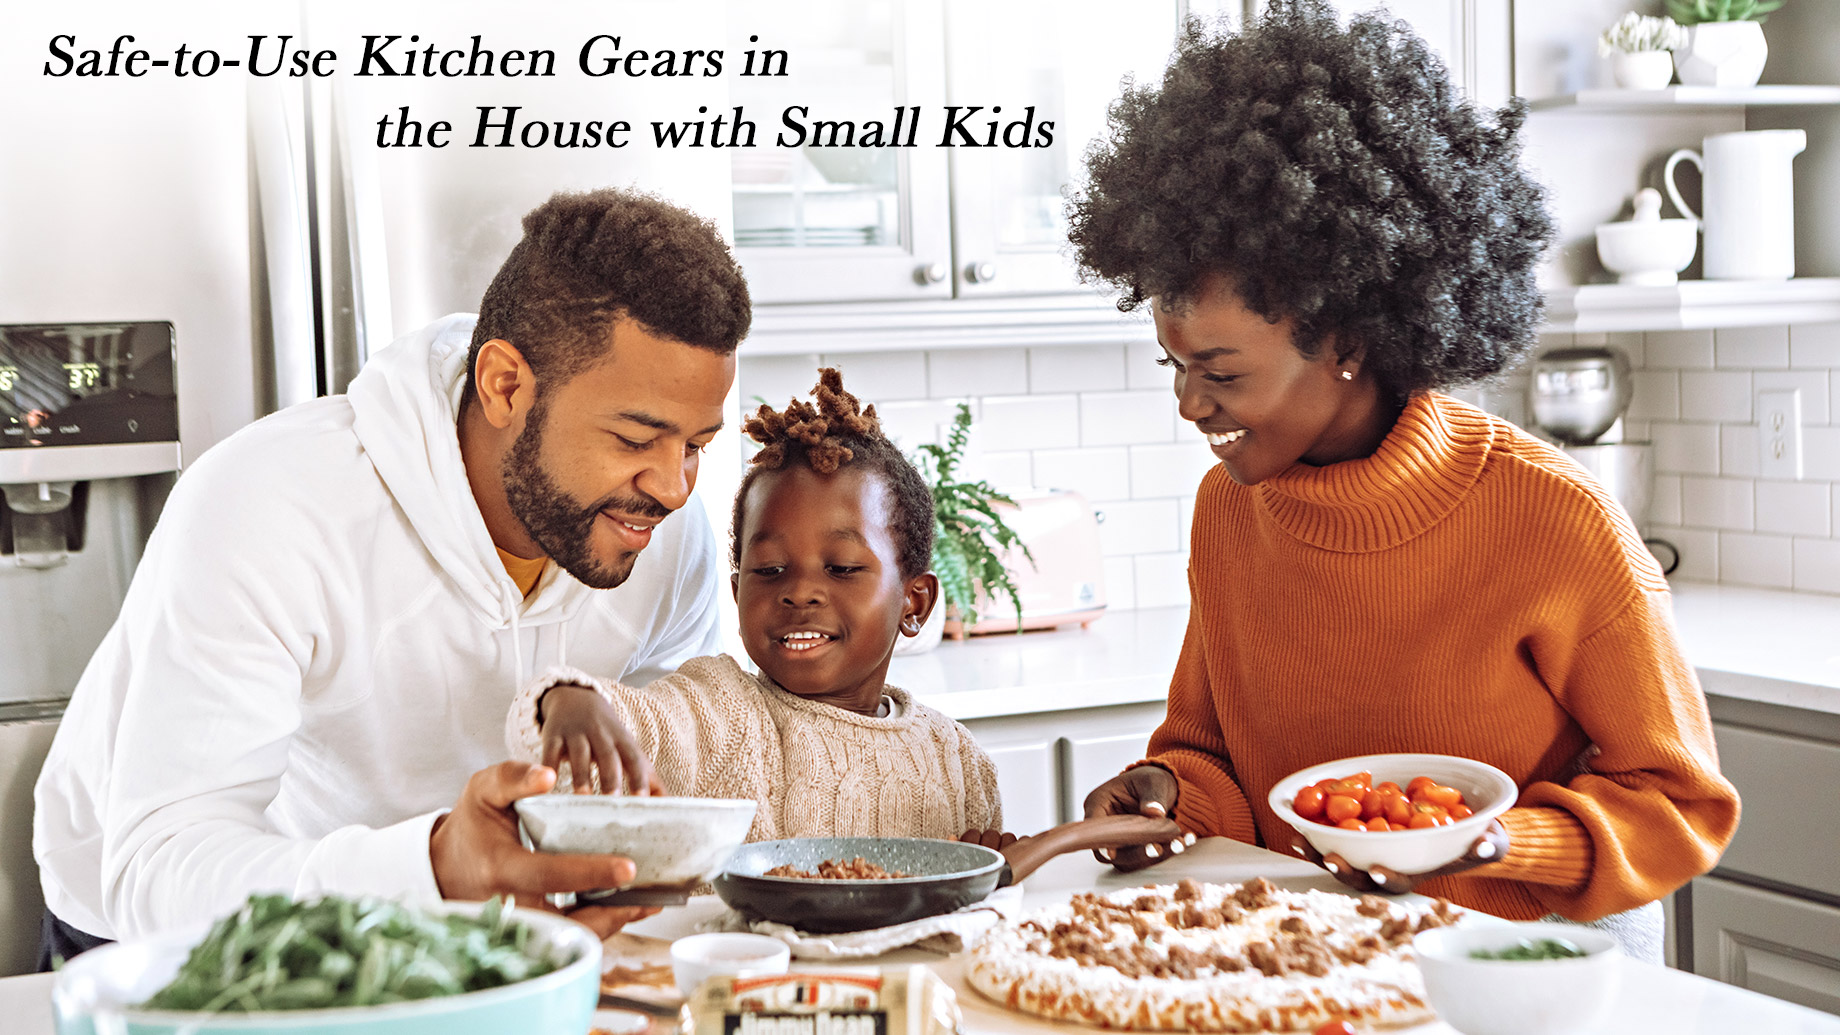 Safe-to-Use Kitchen Gears in the House with Small Kids